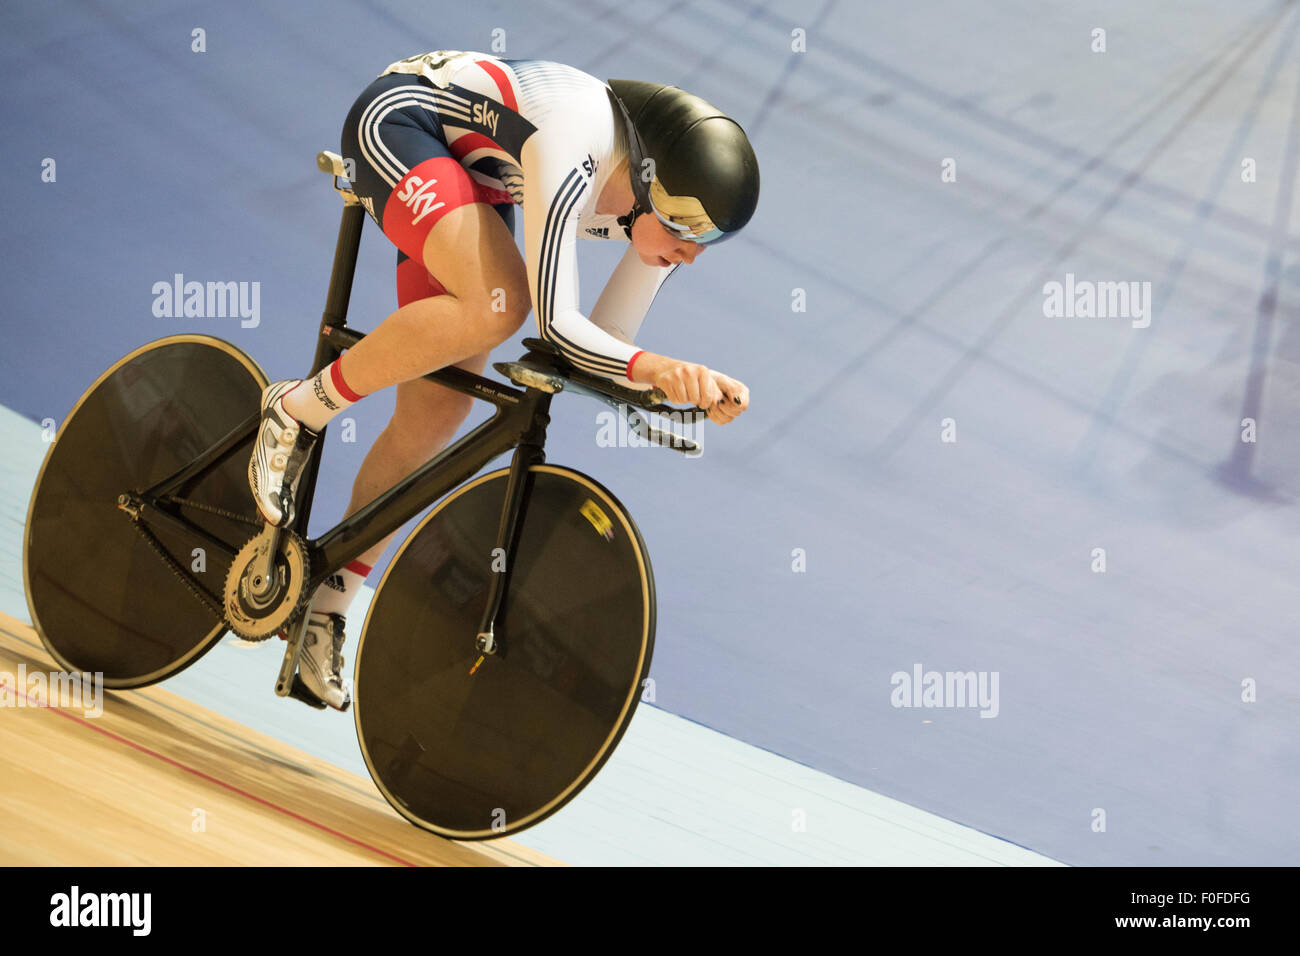 Derby, UK. 14th Aug, 2015. Katie Archibald competes in the individual pursuit at the Revolution Series at Derby Arena, Derby, United Kingdom on 14 August 2015. The Revolution Series is a professional track racing series featuring many of the world's best track cyclists. This event, taking place over 3 days from 14-16 August 2015, is an important preparation event for the Rio 2016 Olympic Games, allowing British riders to score qualifying points for the Games. Credit:  Andrew Peat/Alamy Live News Stock Photo